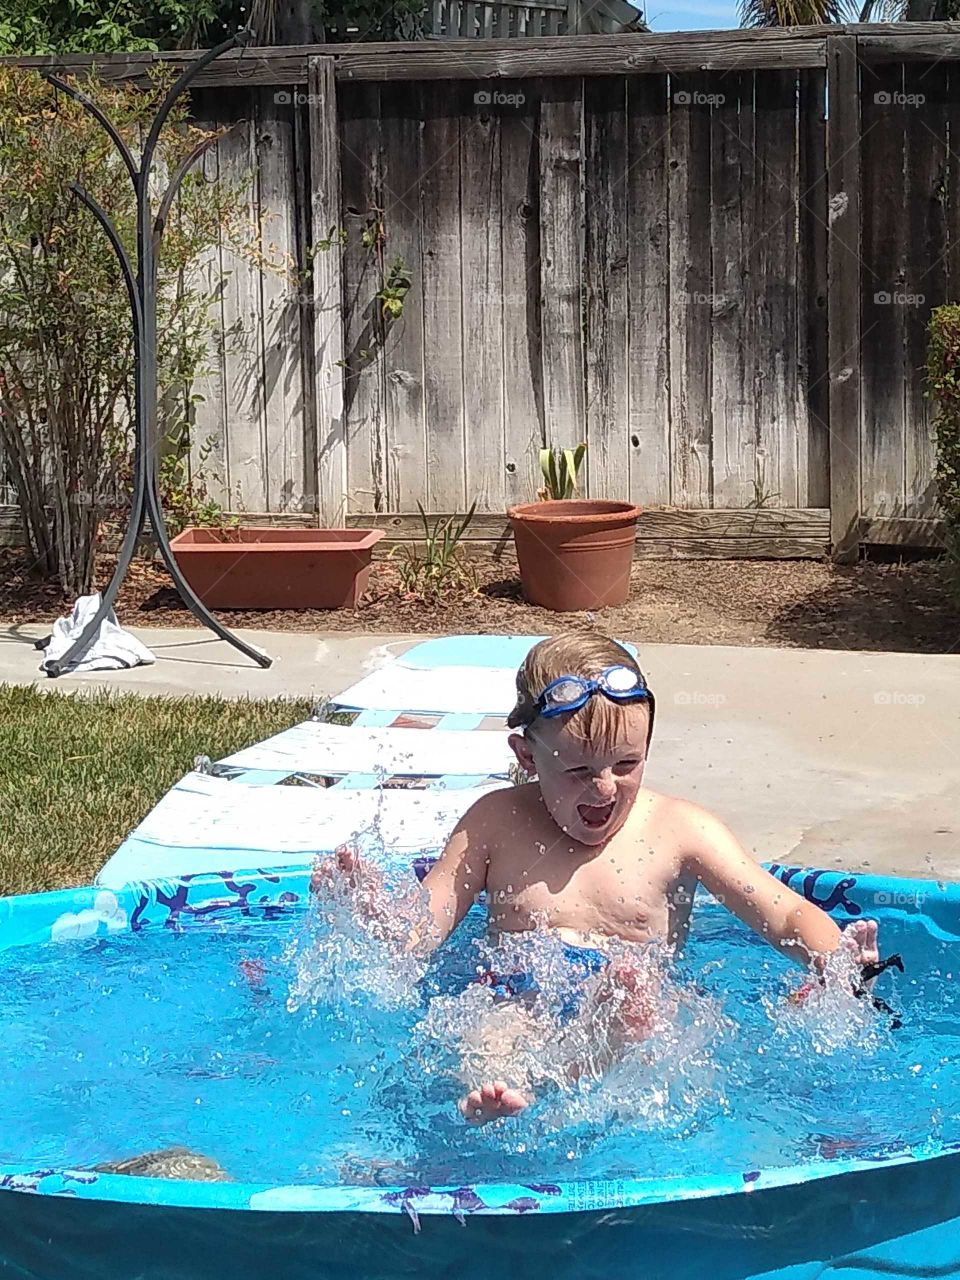 My nephew and I having a great day in the sun today and it's amazing how you can find  baby pools to be very refreshing when you're burning up from the heat!!!😎🤗🤪